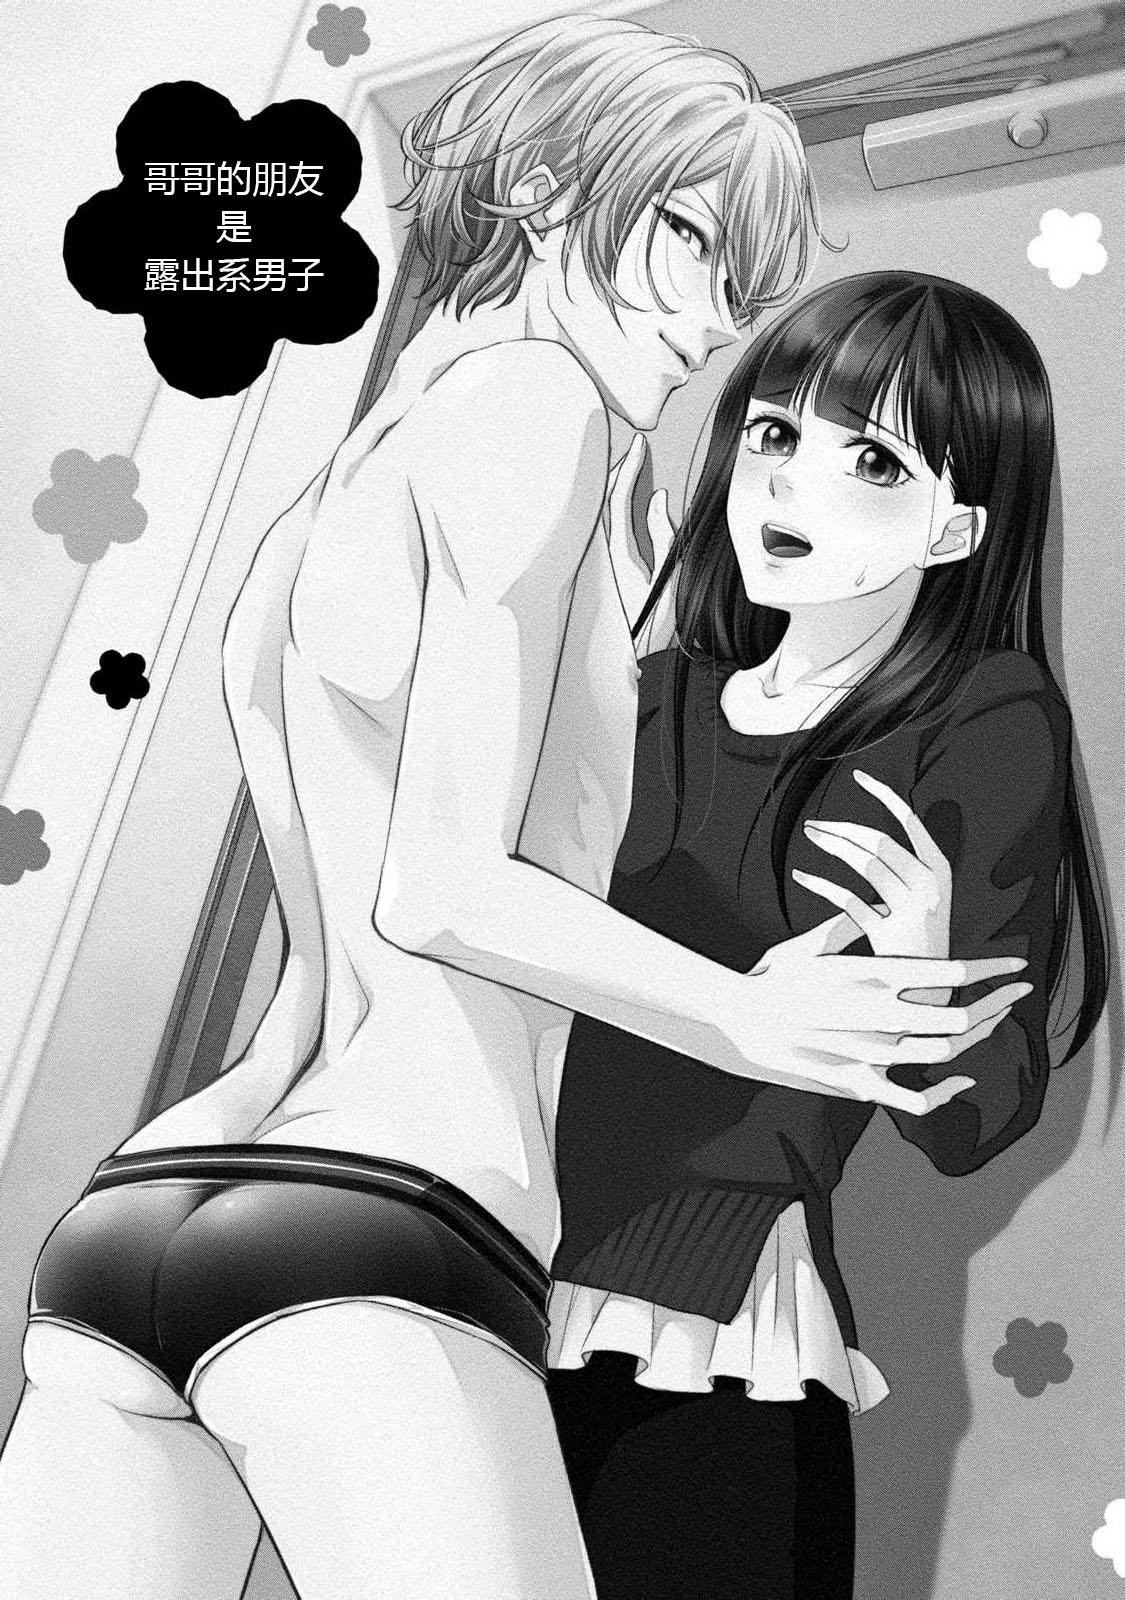 Pounded If my brother's friend was a male of exposure | 哥哥的朋友是露出系男子 Sfm - Page 2